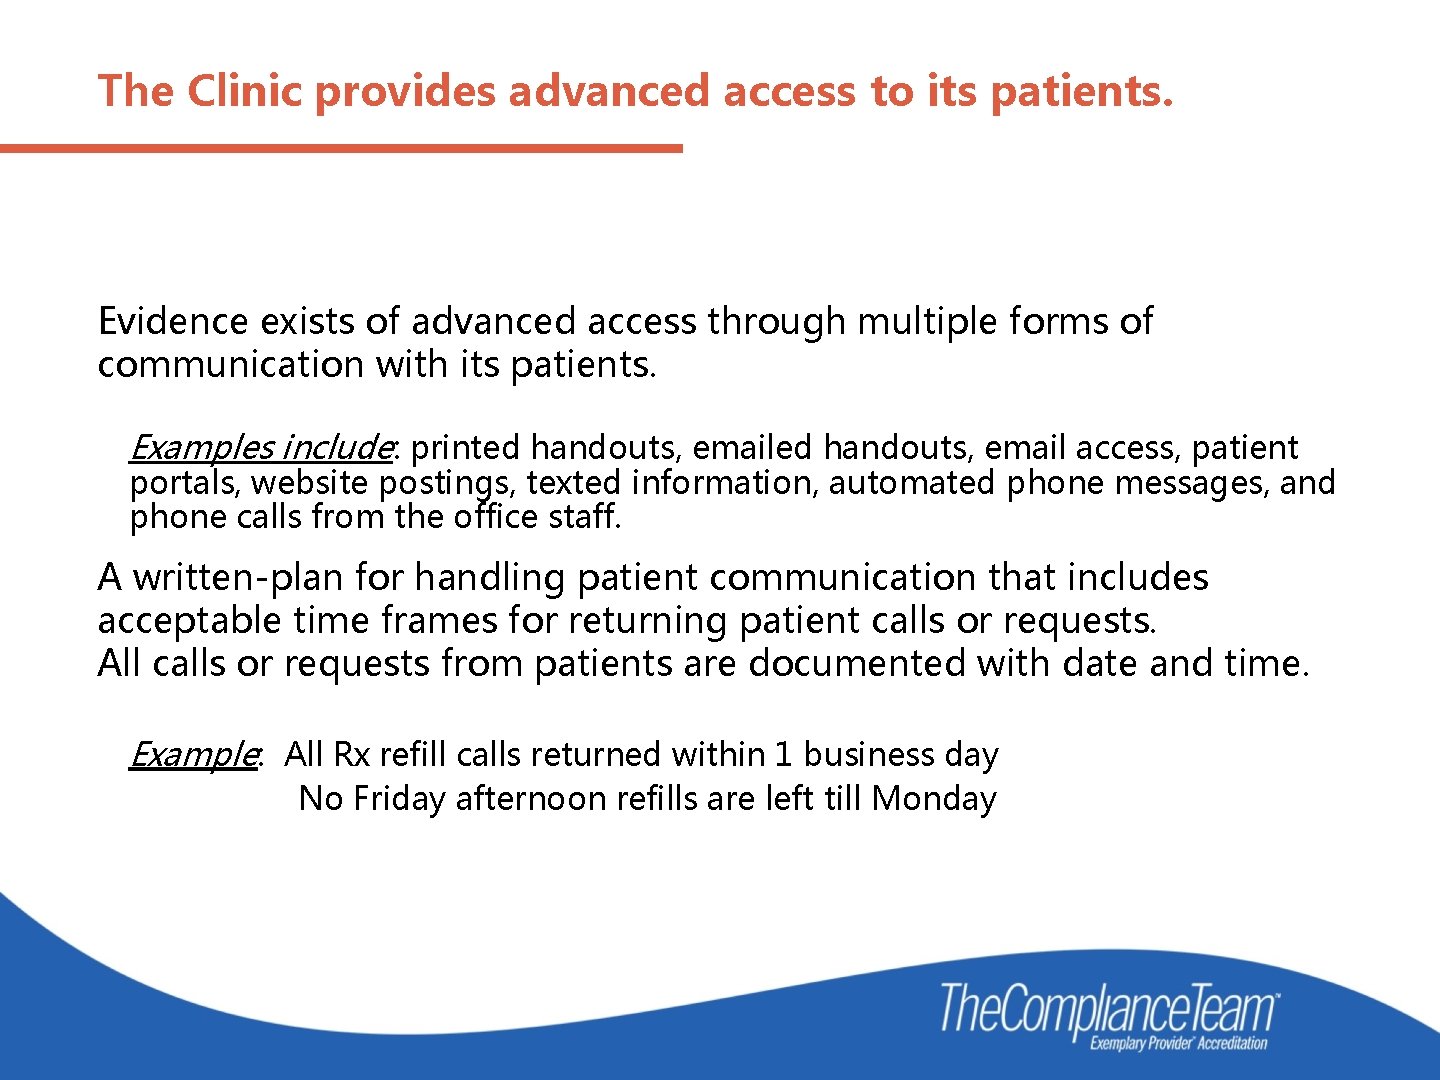 The Clinic provides advanced access to its patients. Evidence exists of advanced access through